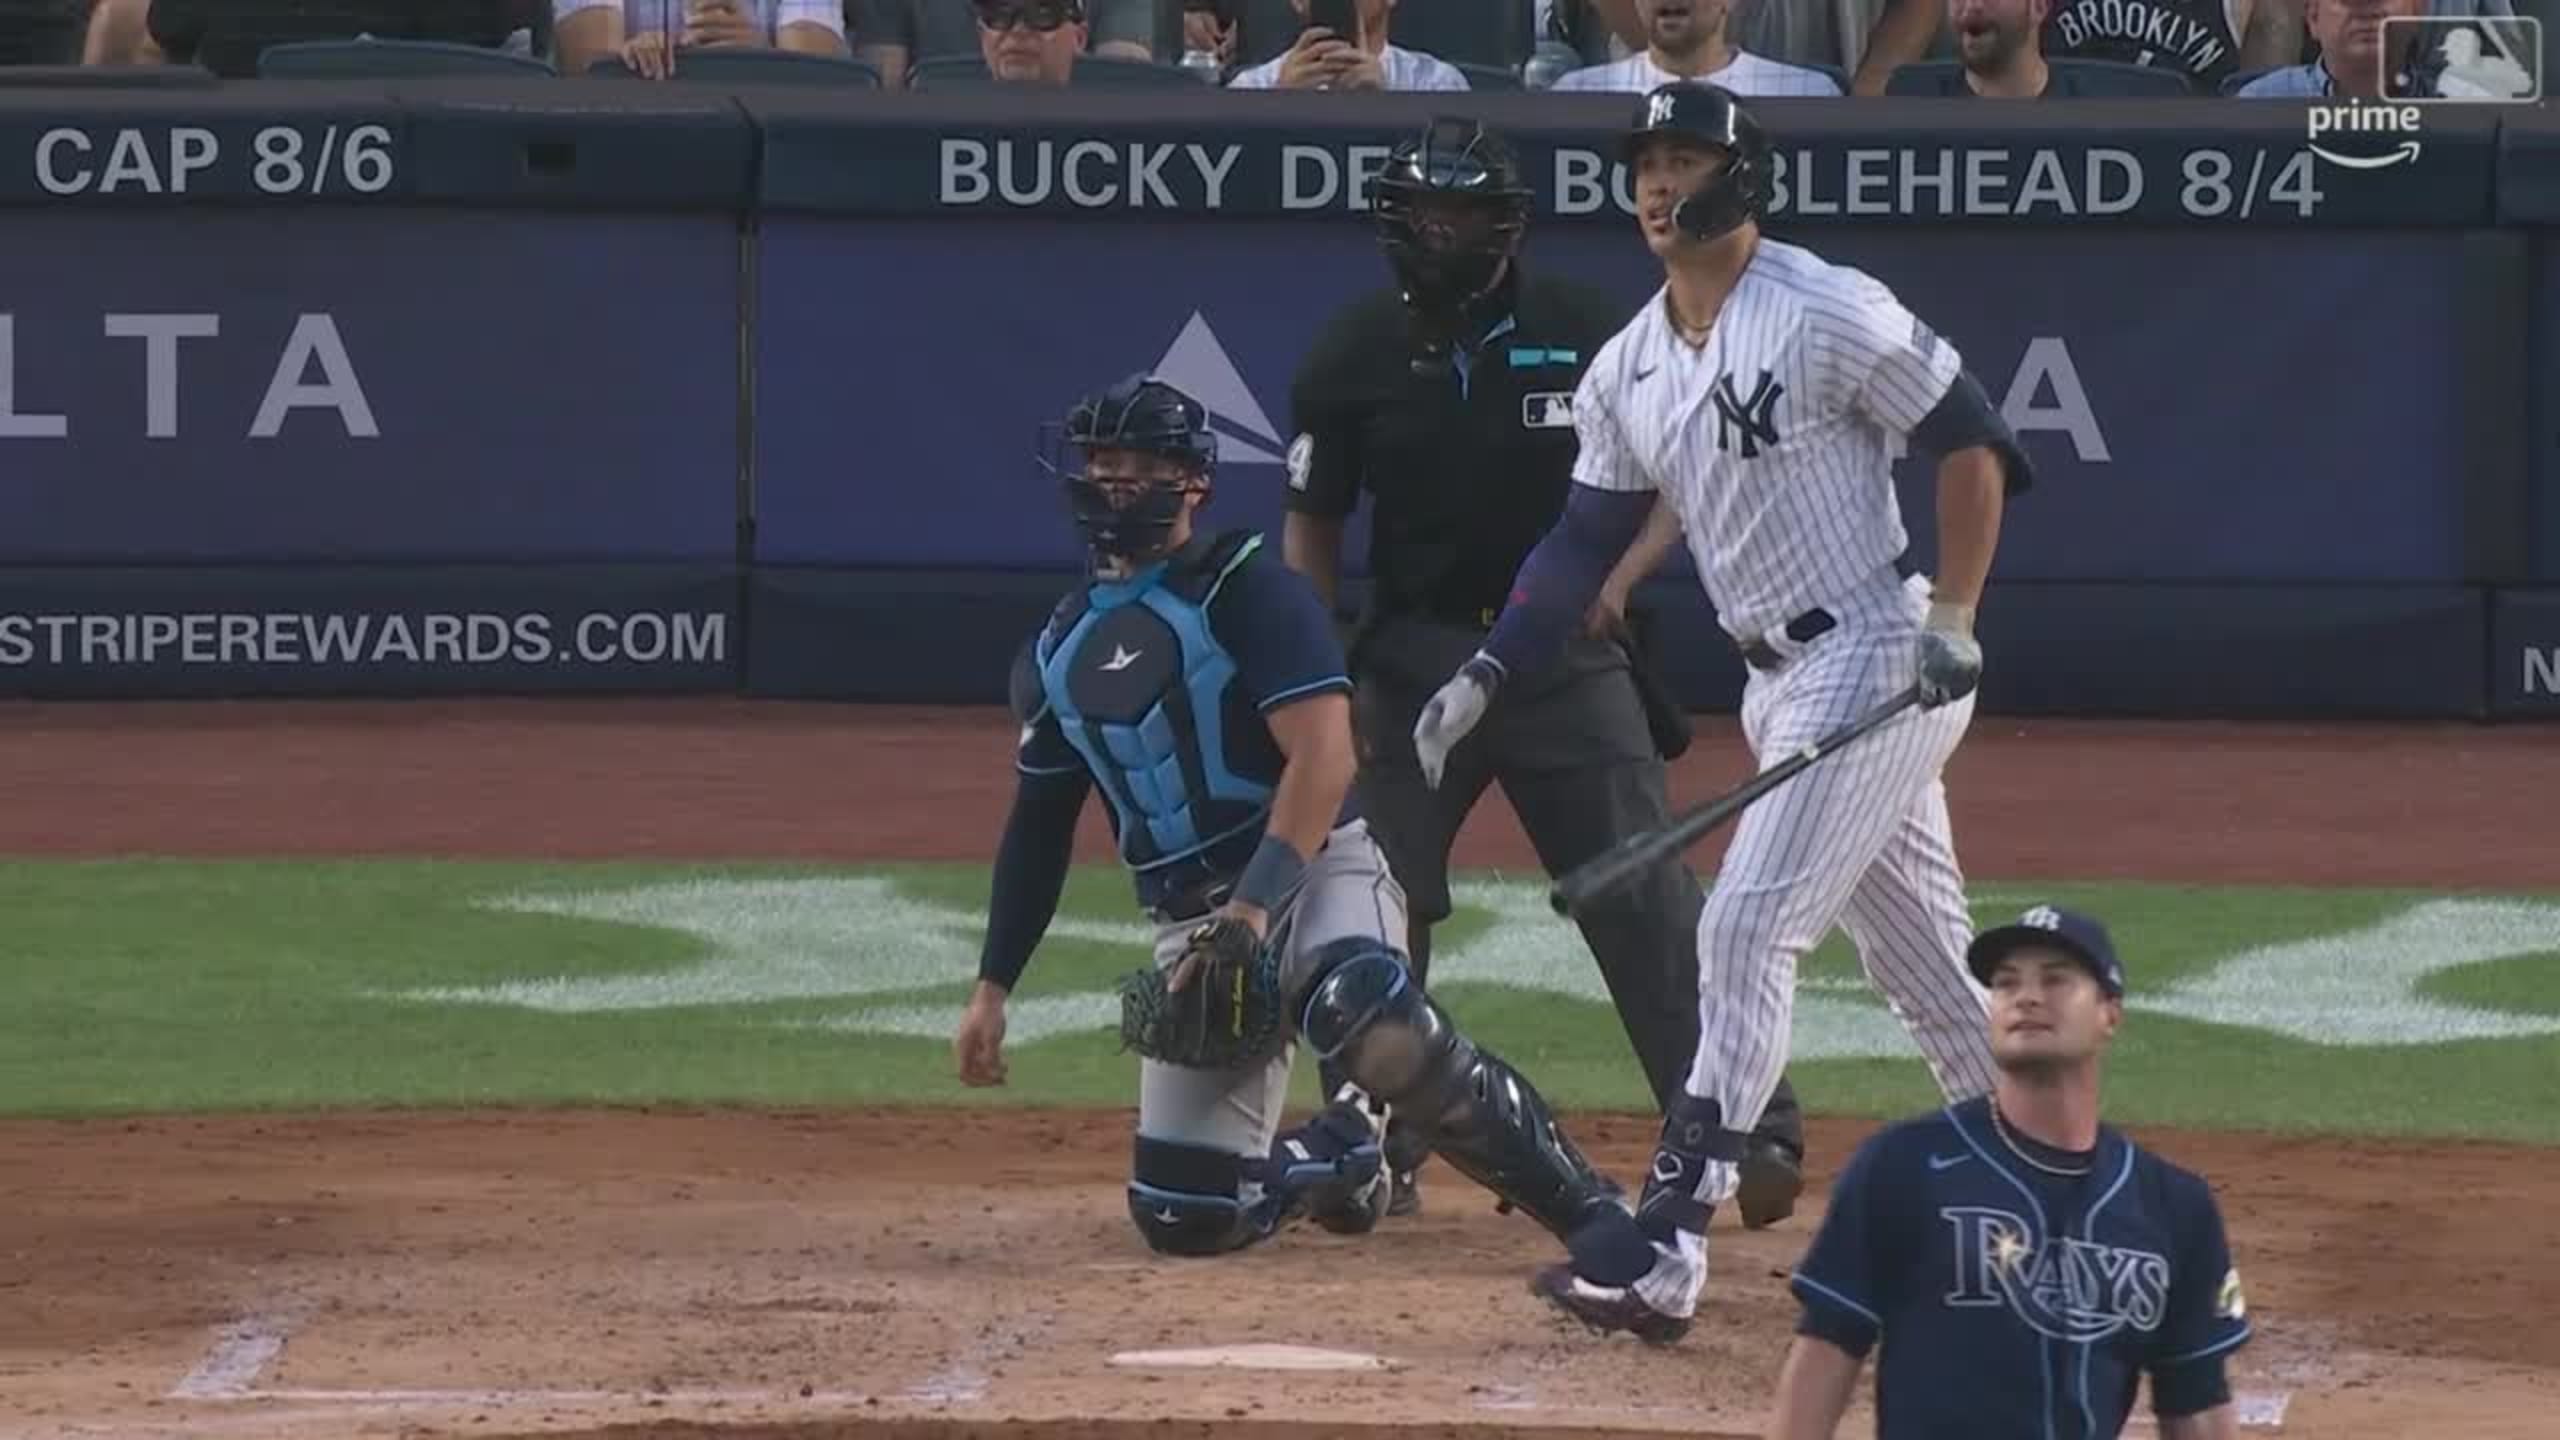 Stanton powers Yankees to 7-2 win over Rays